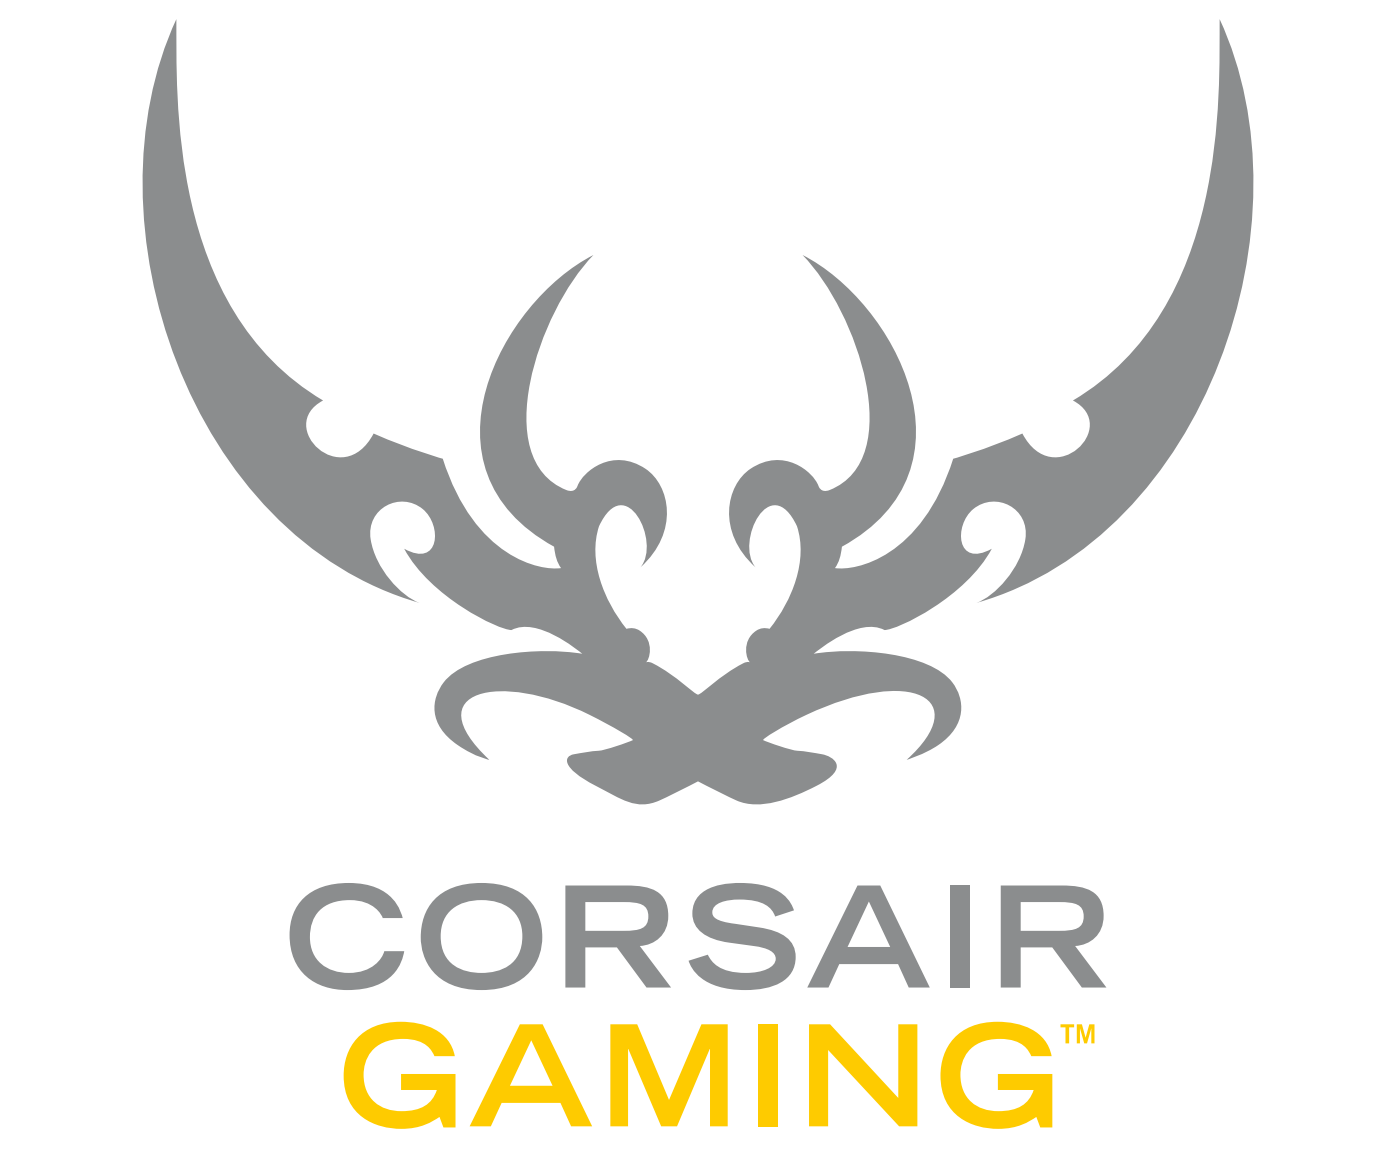 A Petition To Change The Logo (Concerning The Corsair Gaming Logo) Https://www.change Pluspng.com/p/corsair Components Inc Keep The Old Corsair Logo - Corsair, Transparent background PNG HD thumbnail